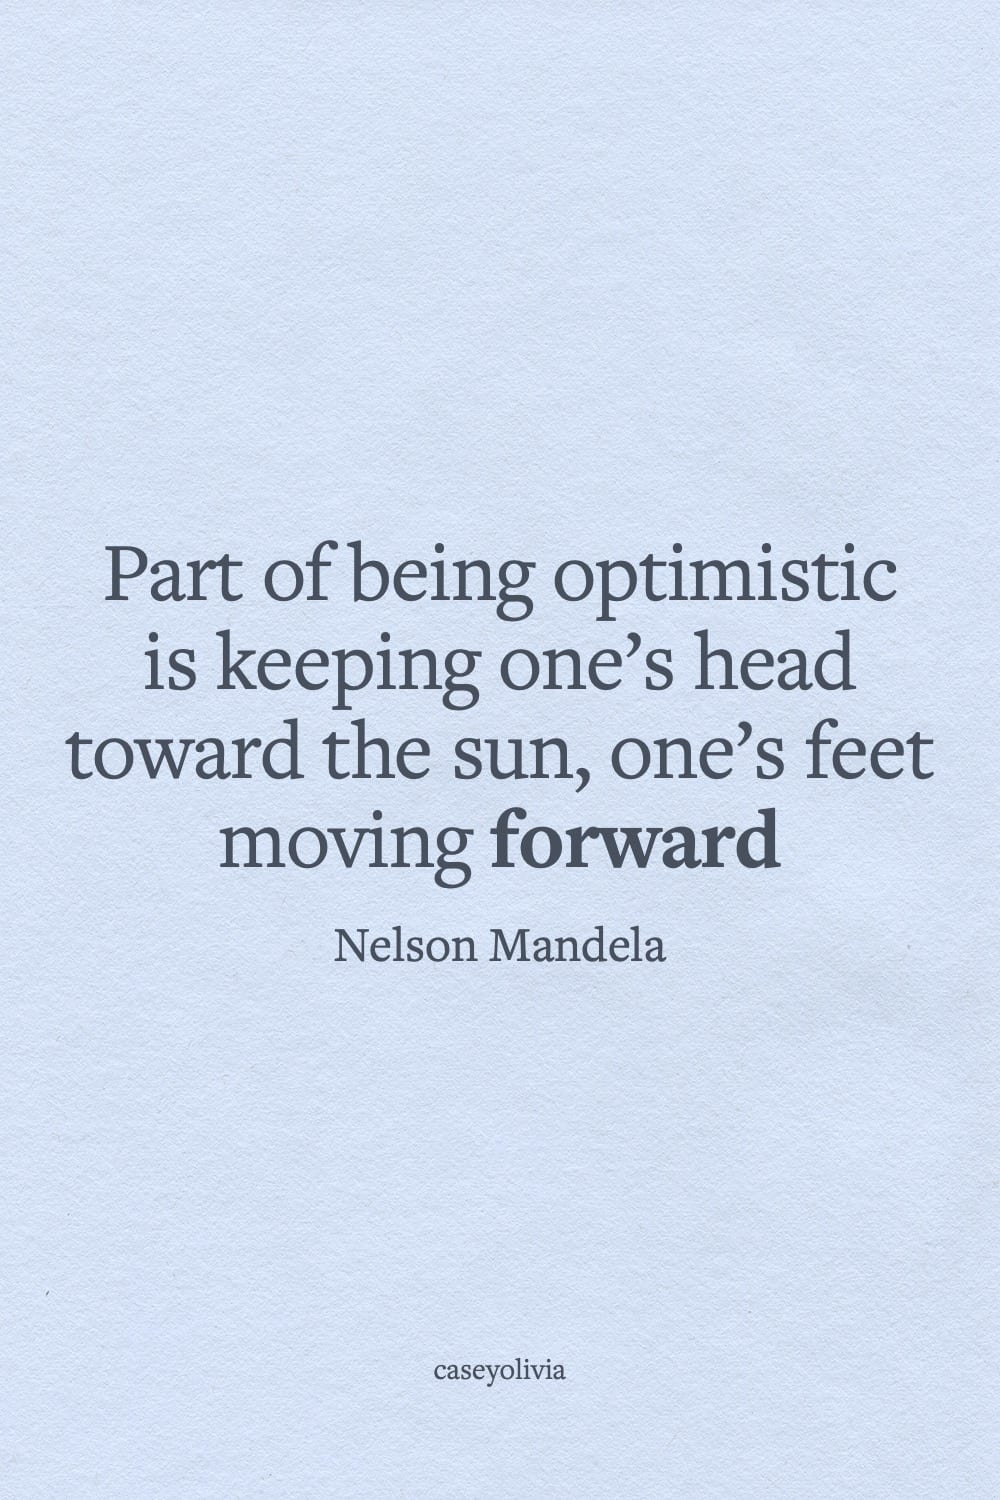 nelson mandela optimistic quote about moving forward in life